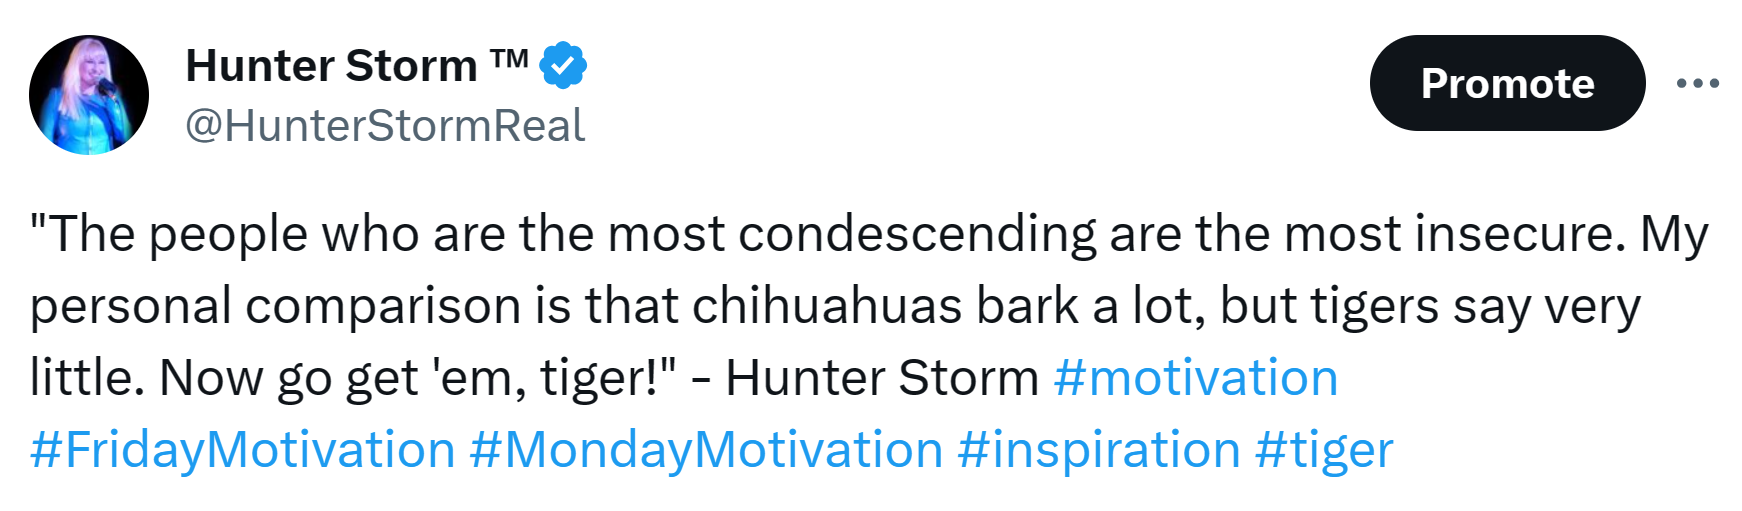 Hunter Storm Wisdom: Timeless Insights and Inspiration | "'The people who are the most condescending are the most insecure. My personal comparison is that chihuahuas are bark a lot, but tigers say very little.' Now go get 'em, tiger!"